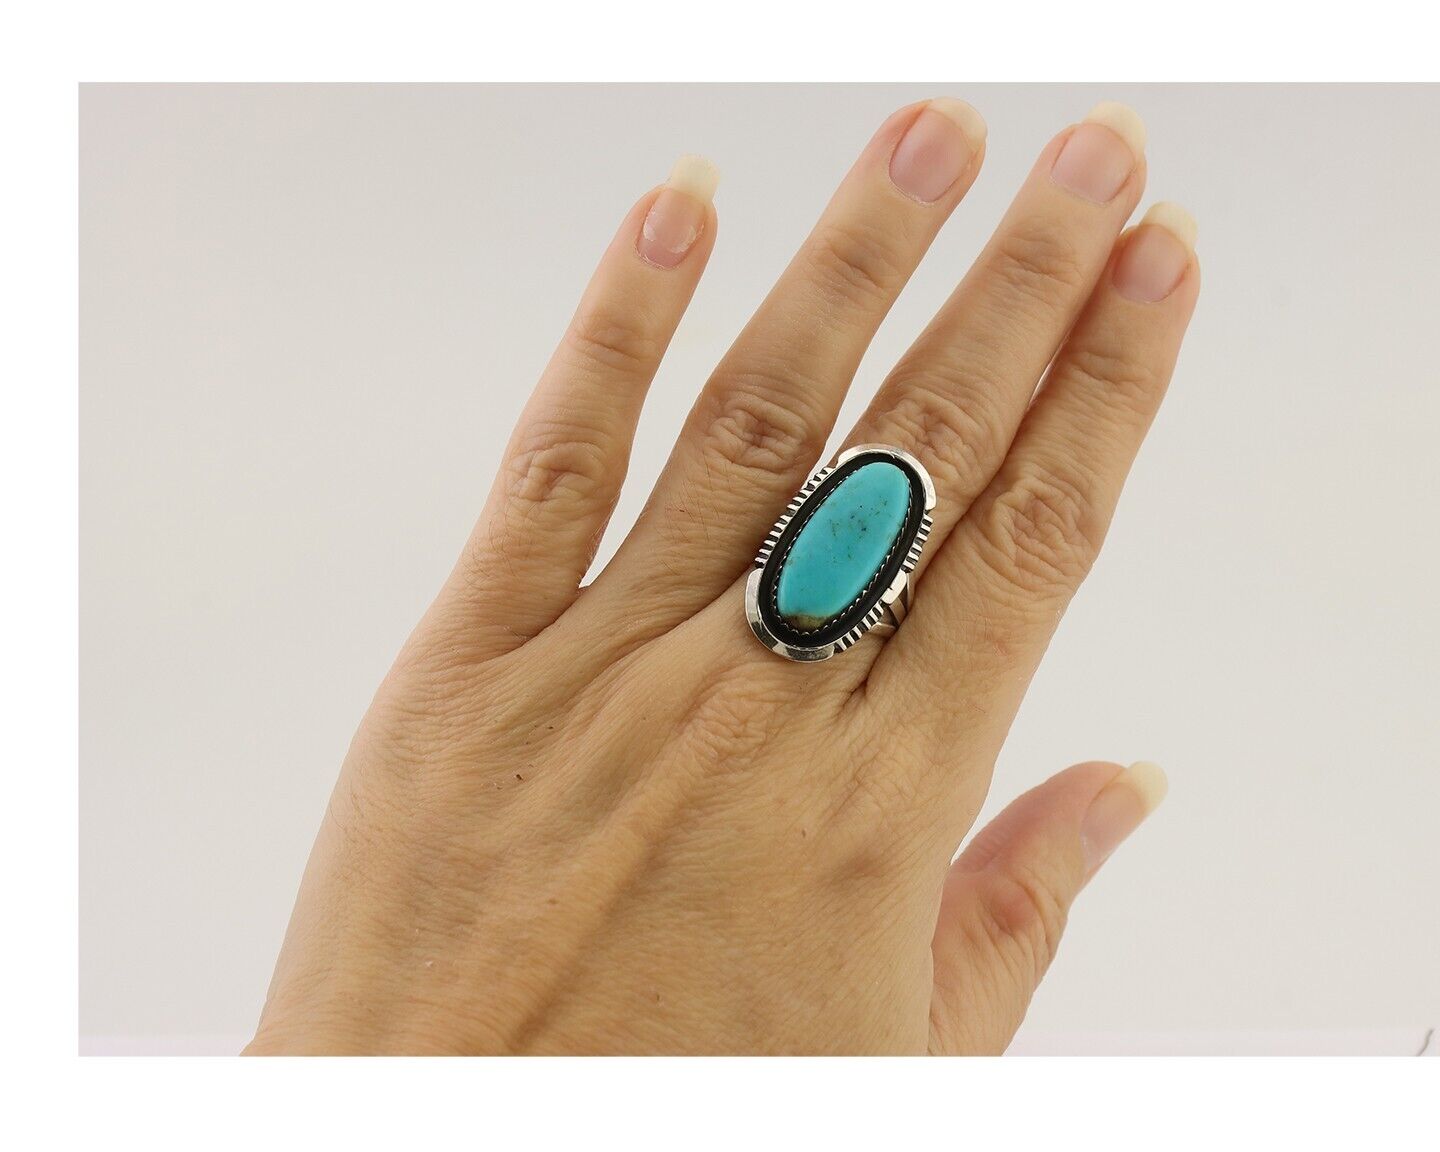 Navajo Ring 925 Silver Blue Turquoise Artist Signed William Denetdale C.80's